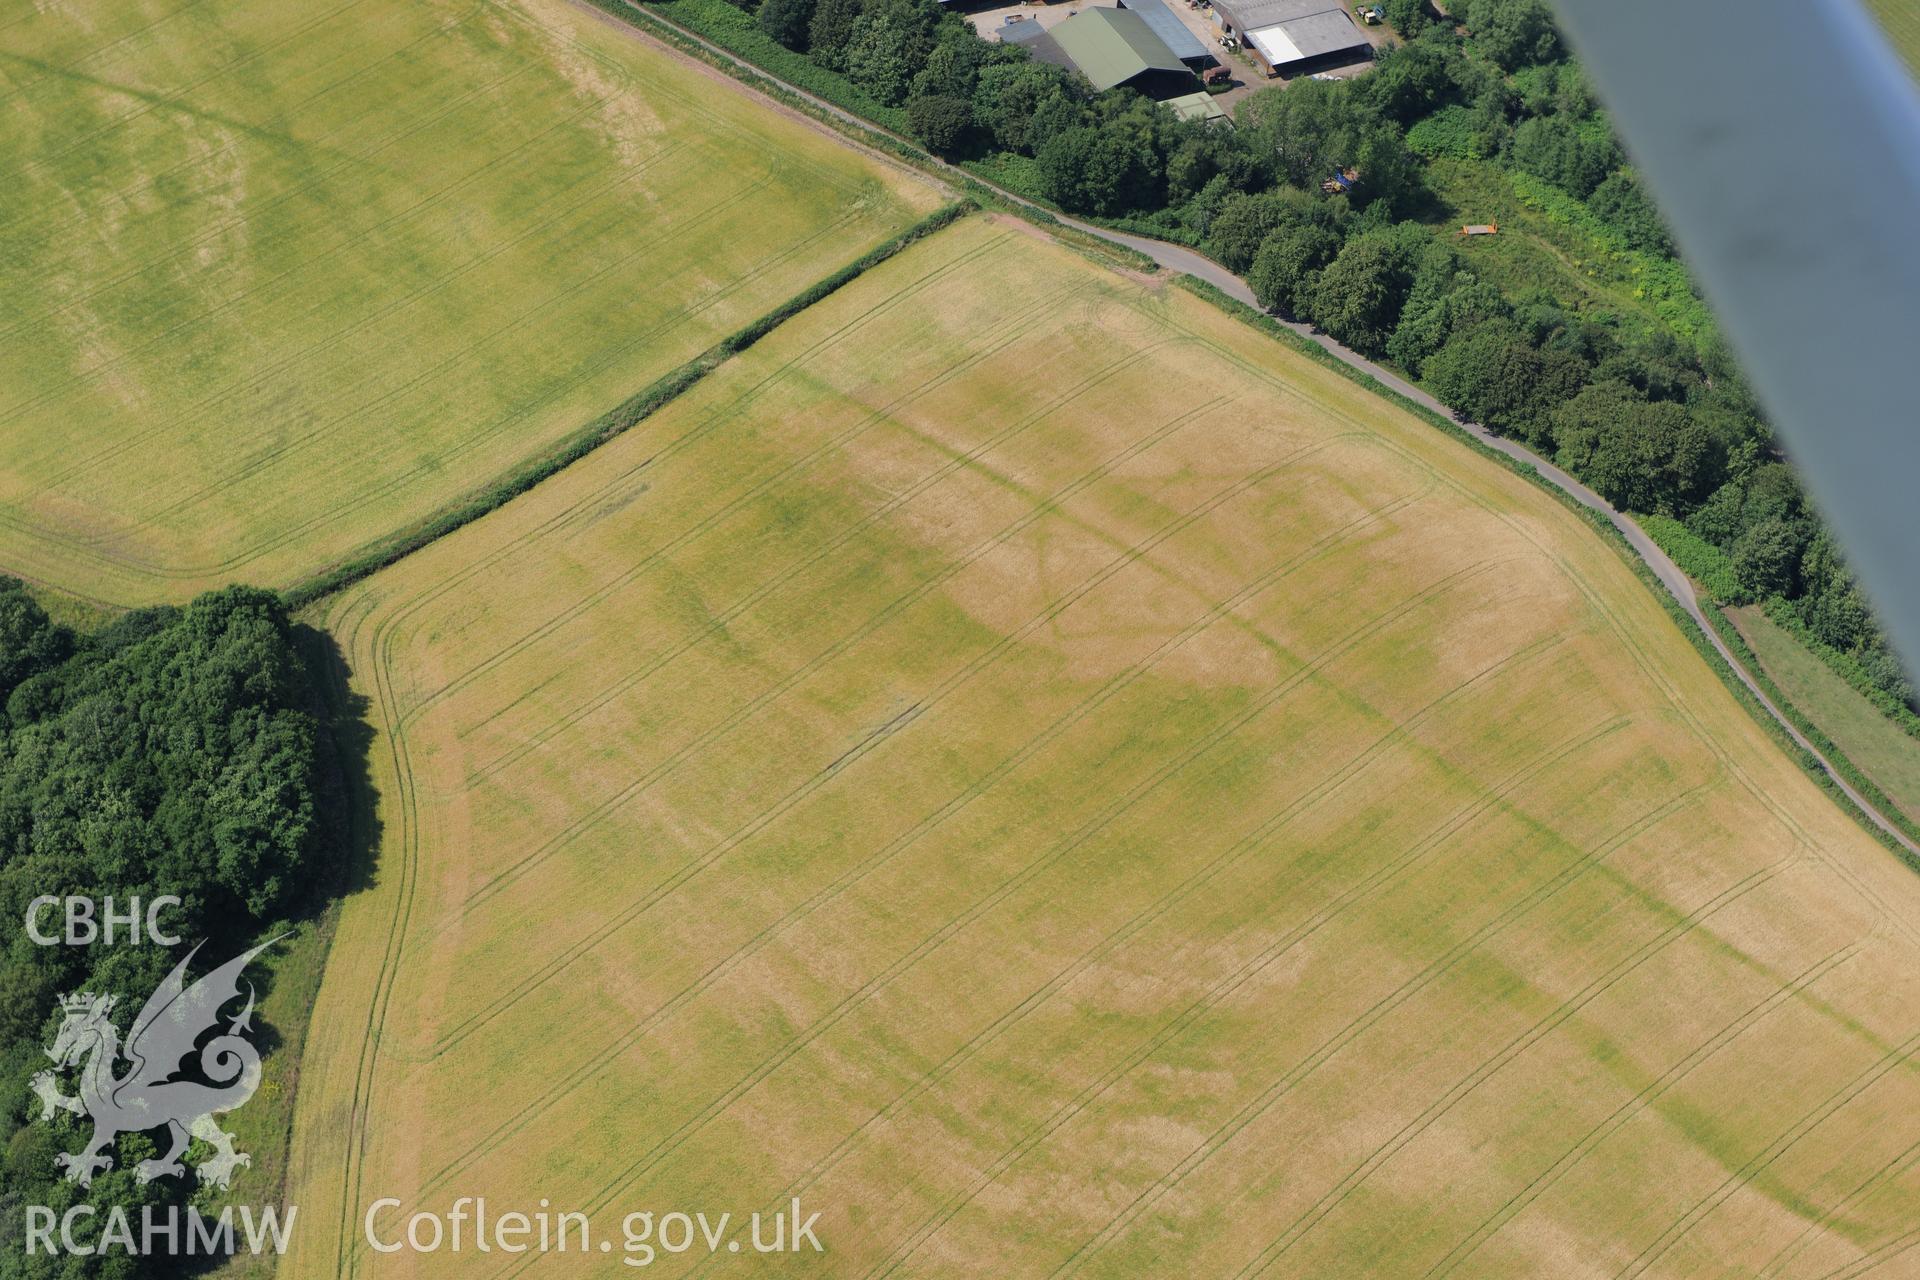 Malthouse Road defended enclosure (east), north west of Caerleon. Oblique aerial photograph taken during the Royal Commission?s programme of archaeological aerial reconnaissance by Toby Driver on 1st August 2013.